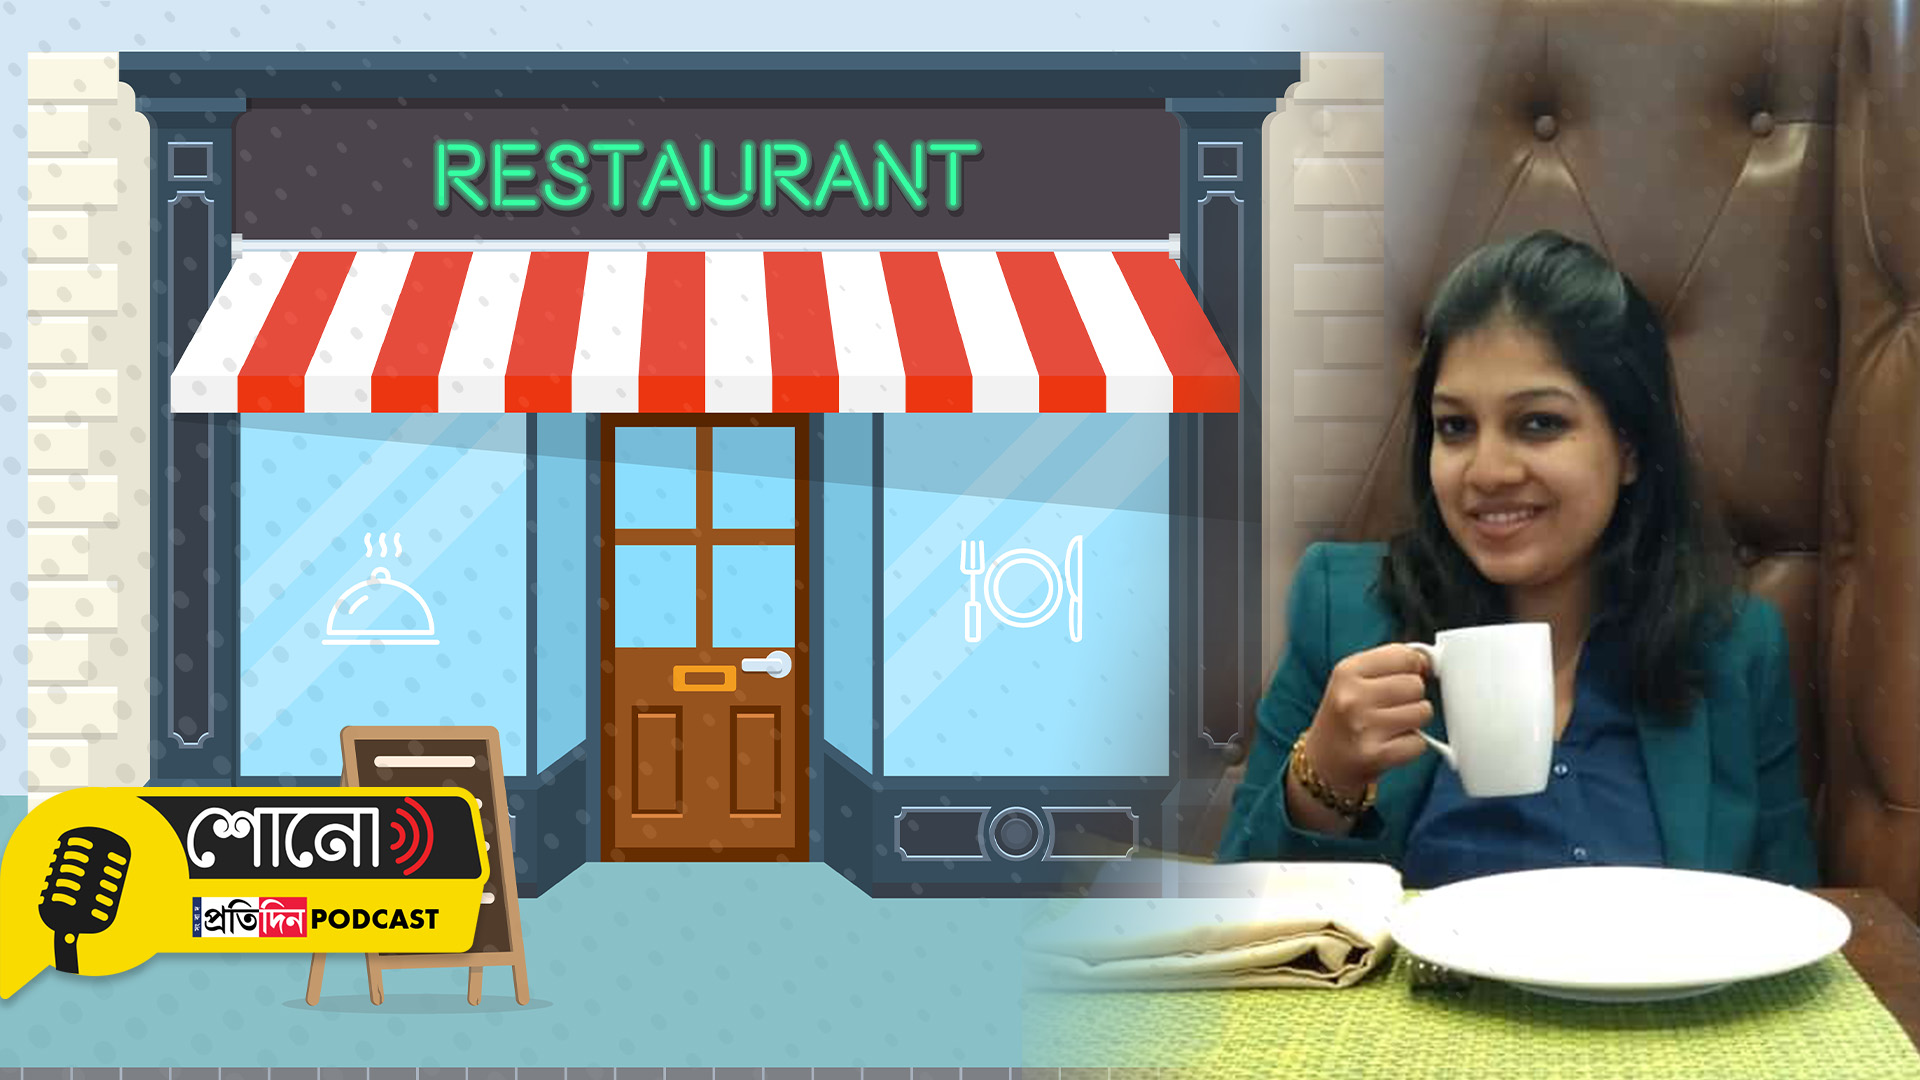 know more about this 24 hour open restaurant of kolkata and its female owner